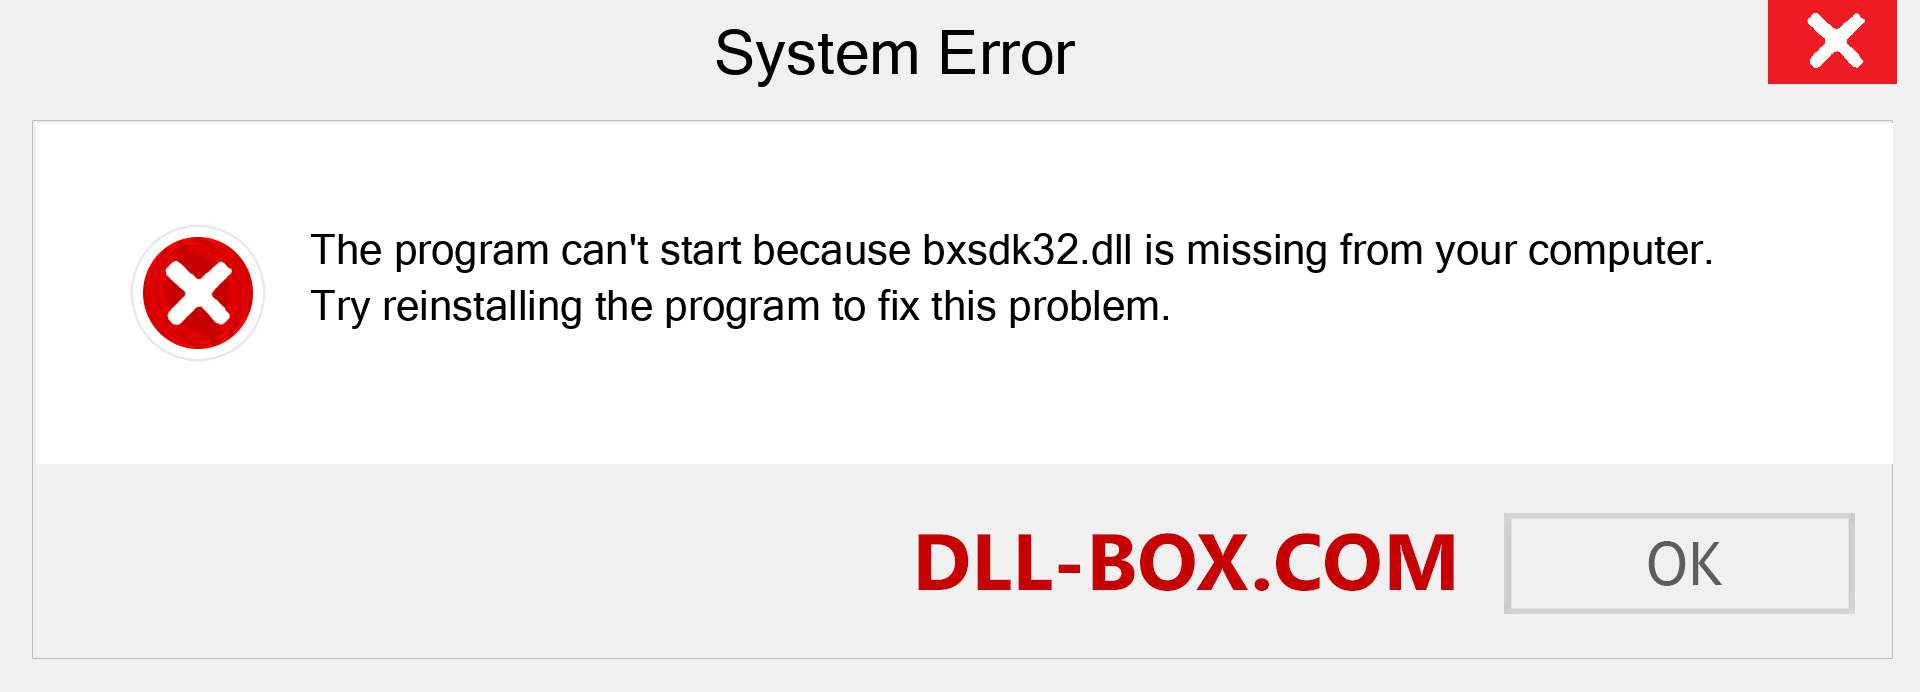  bxsdk32.dll file is missing?. Download for Windows 7, 8, 10 - Fix  bxsdk32 dll Missing Error on Windows, photos, images